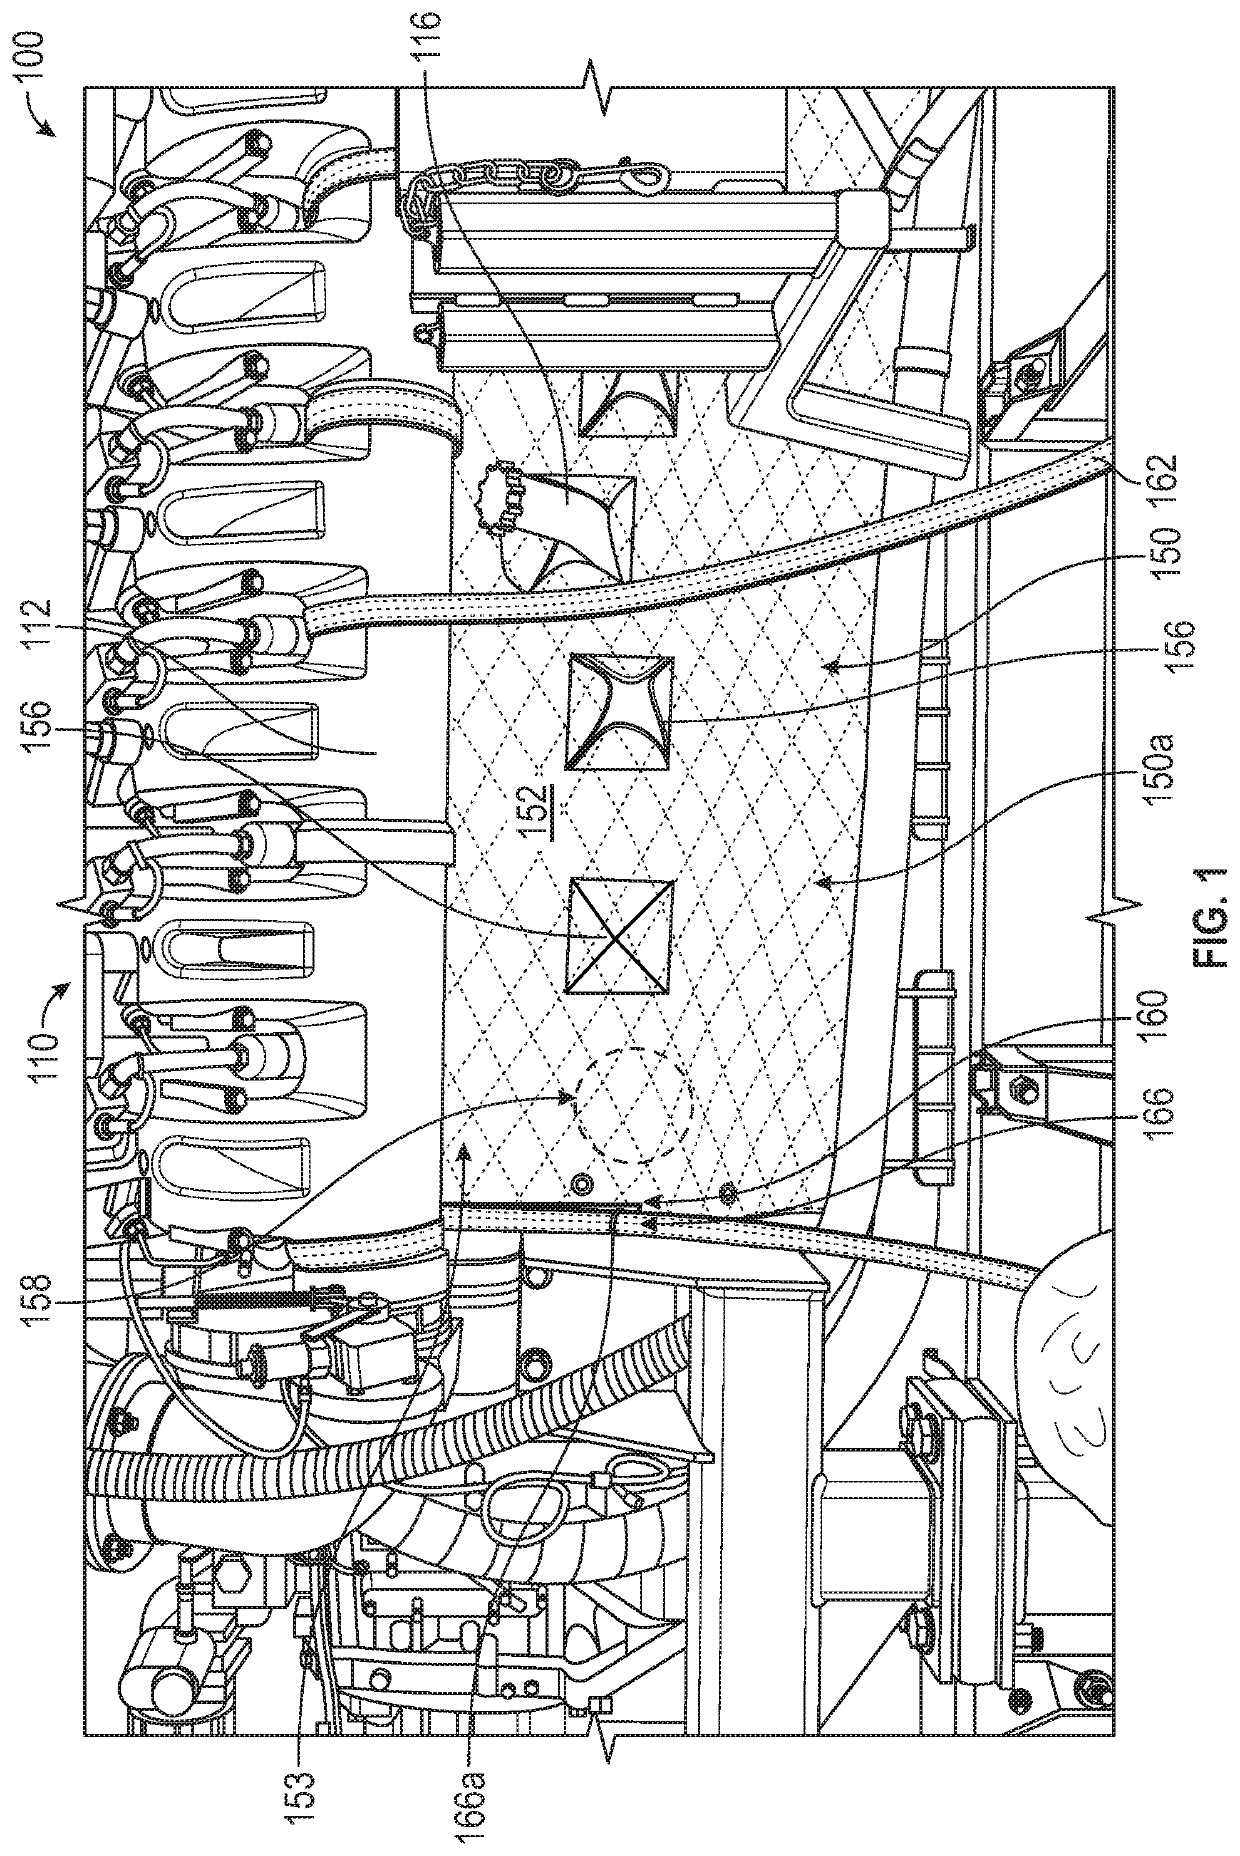 Engine System Having Containment Blanket And Method Of Improving Engine Safety